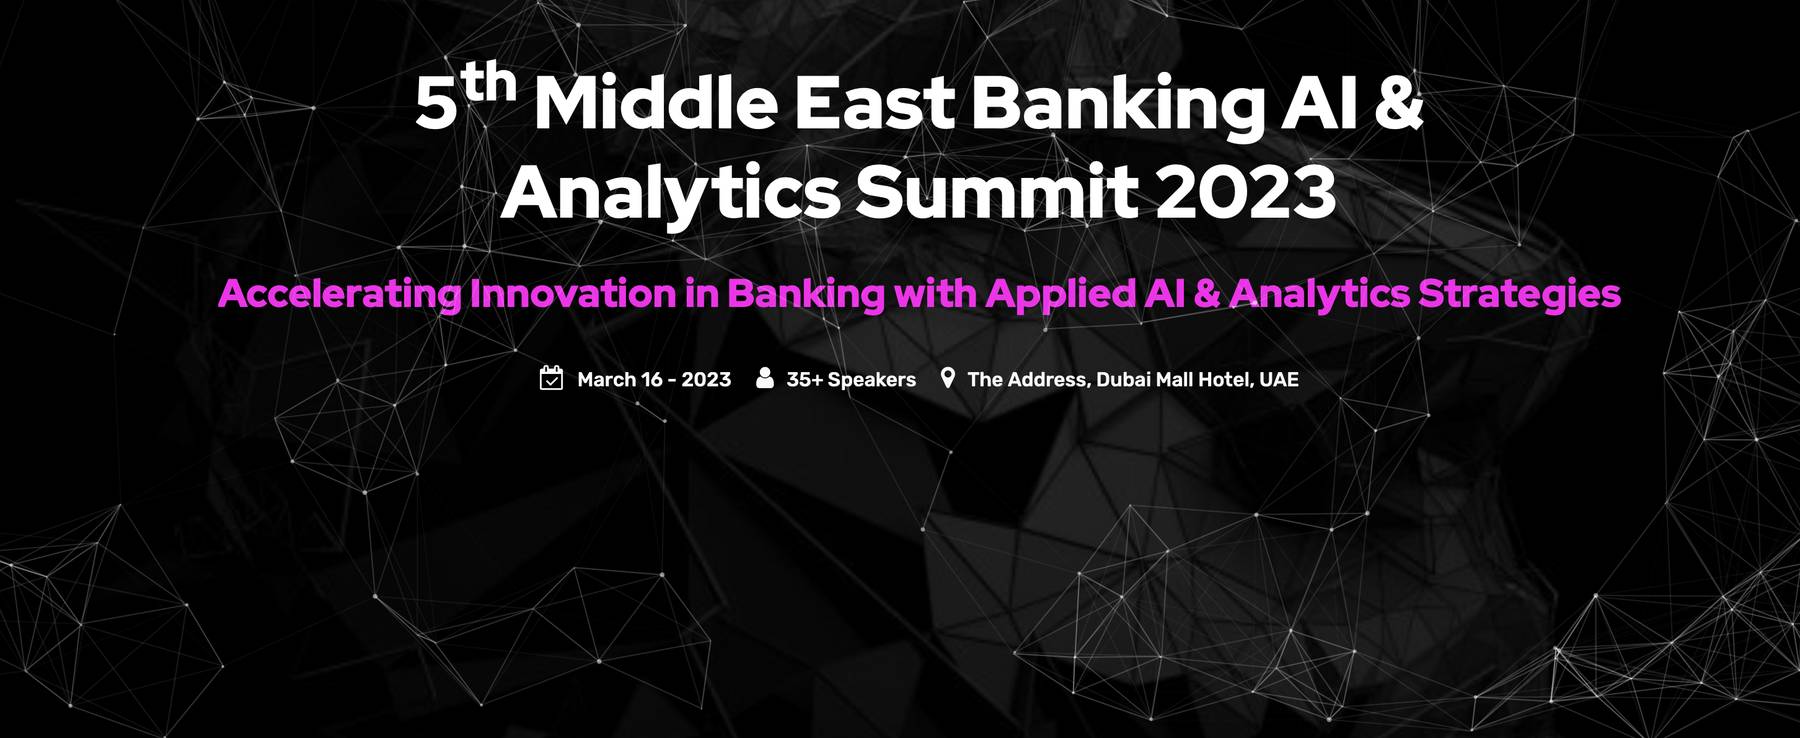 Middle East Banking AI & Analytics Summit 2022